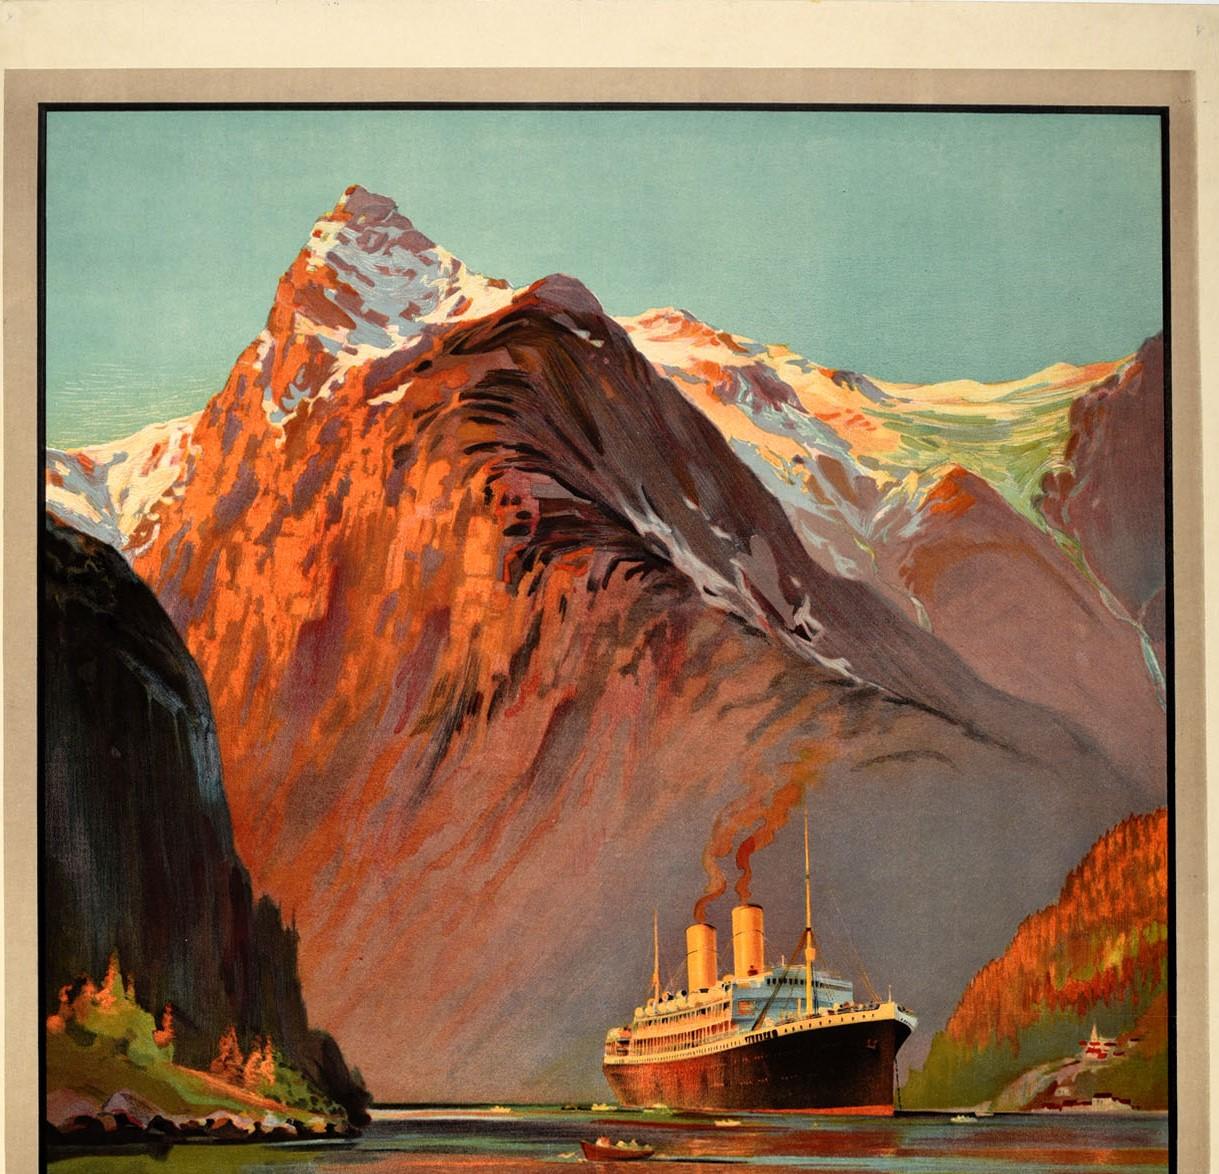 Original vintage poster advertising cruise travel - Orient Line Cruises To Norway 13 days from 20 Guineas apply 5 Fenchurch Street London agents in United States Cunard Steam Ship Co Ltd - featuring scenic artwork by the painter Odin Rosenvinge